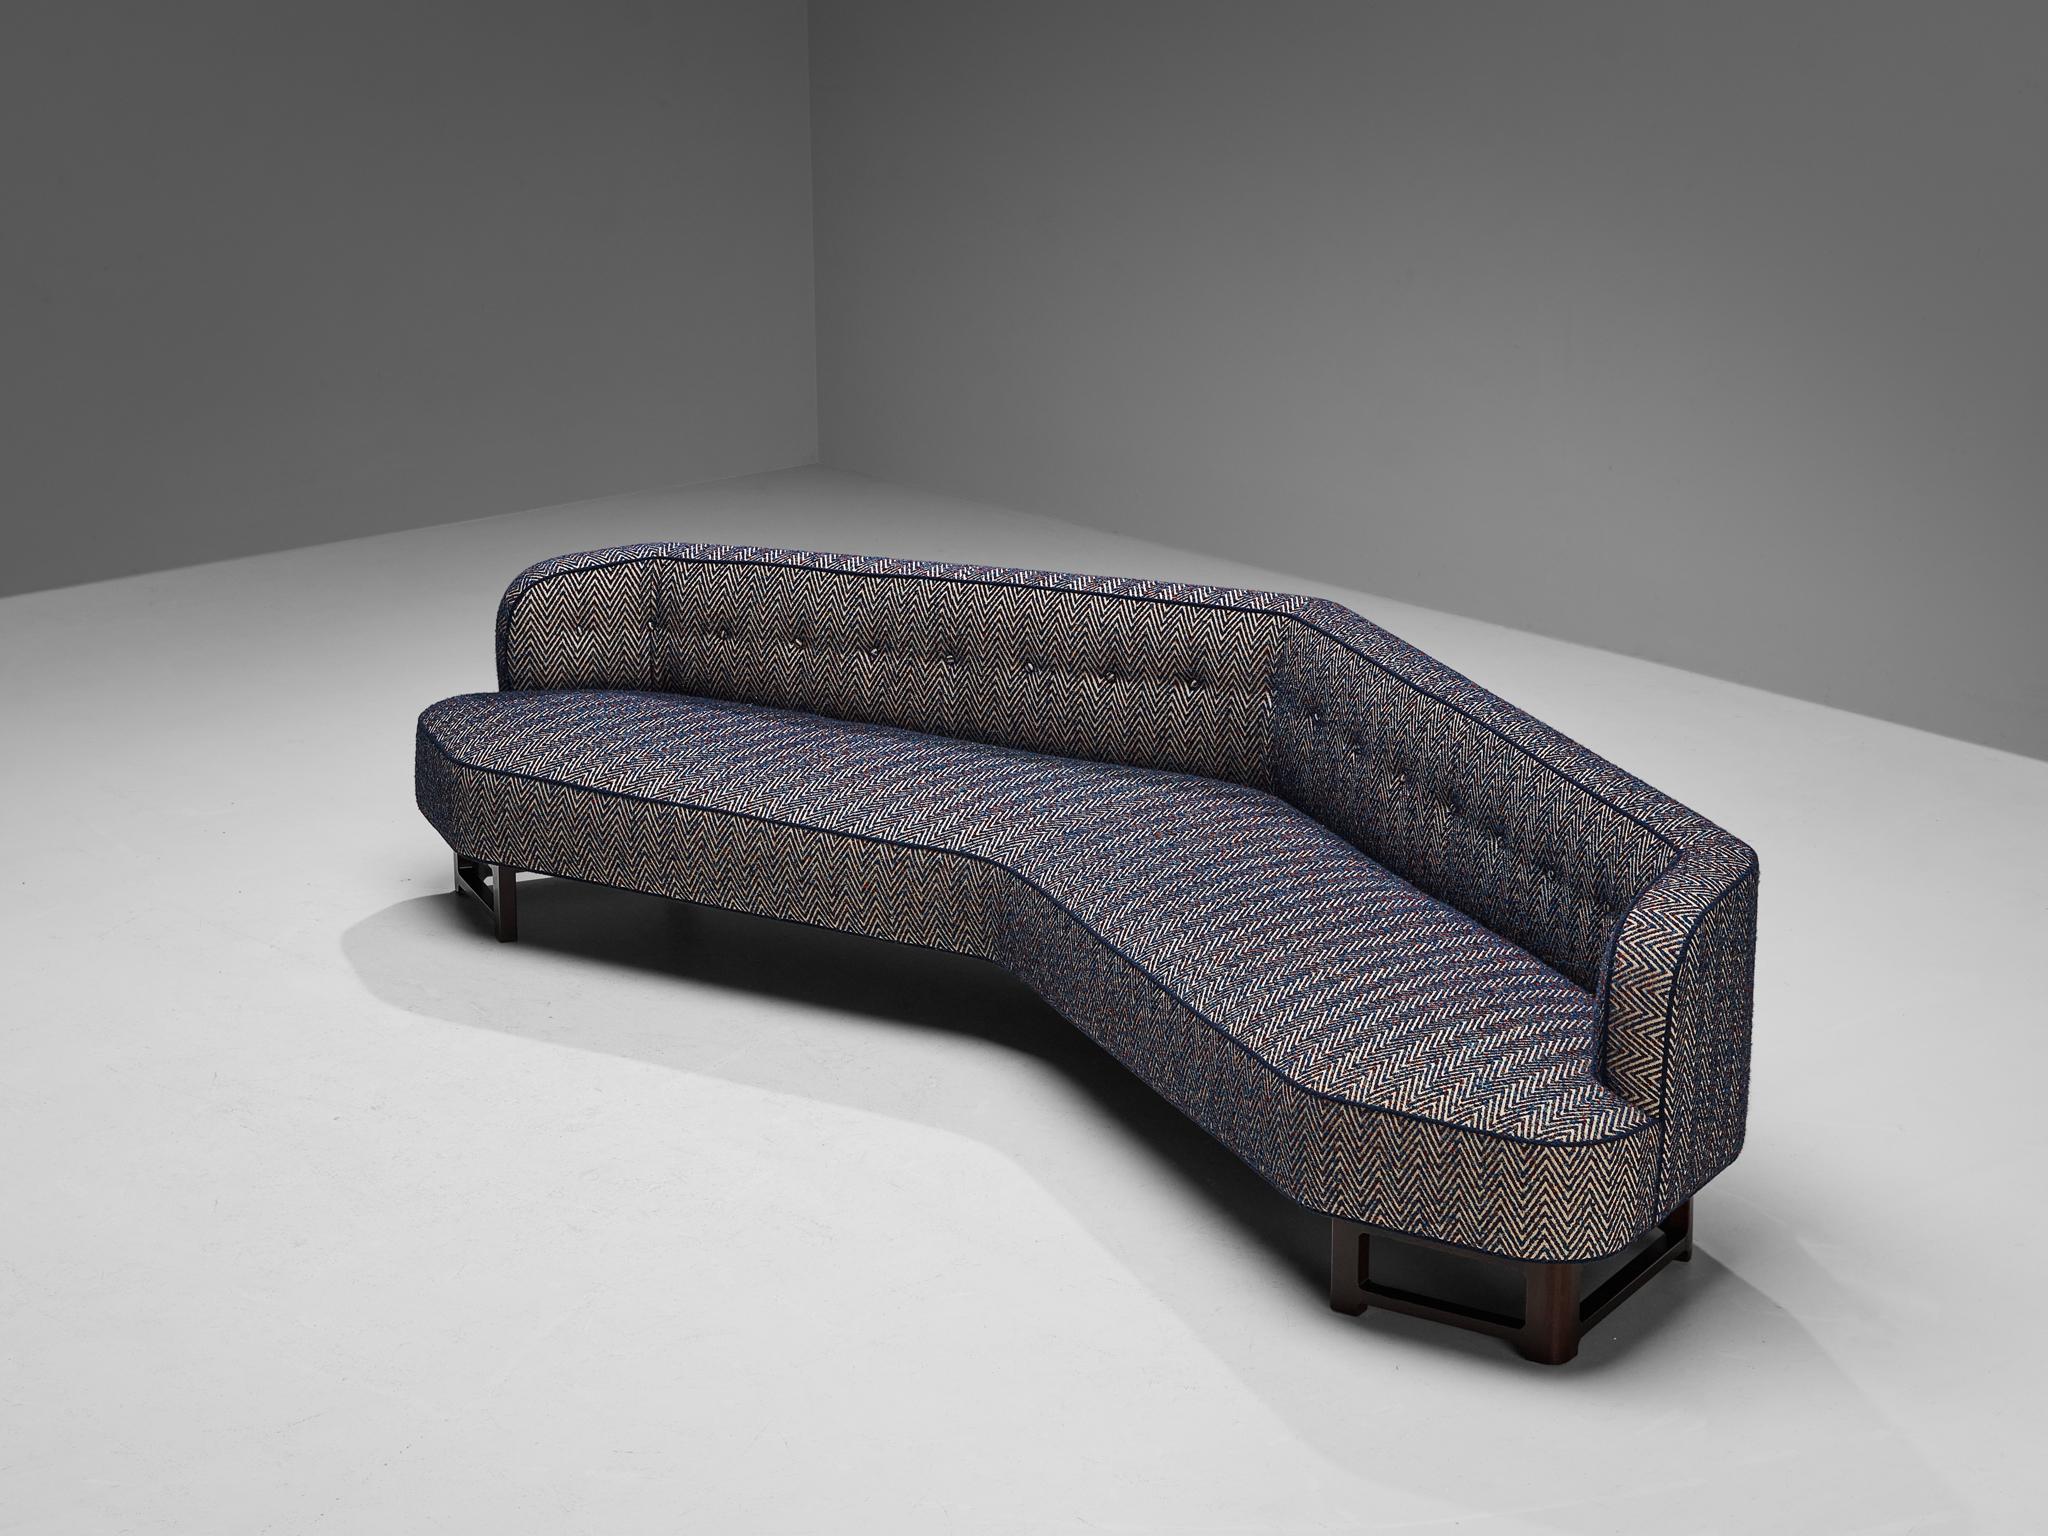 Edward Wormley for Dunbar, Janus sofa, model 6392, Evolution21 fabric Brazil Blue, mahogany, United States, 1960s.

Wide angled 'Janus' sofa by Edward Wormley. This sofa has a modern shape and sinuous lines which create a comfortable and appealing